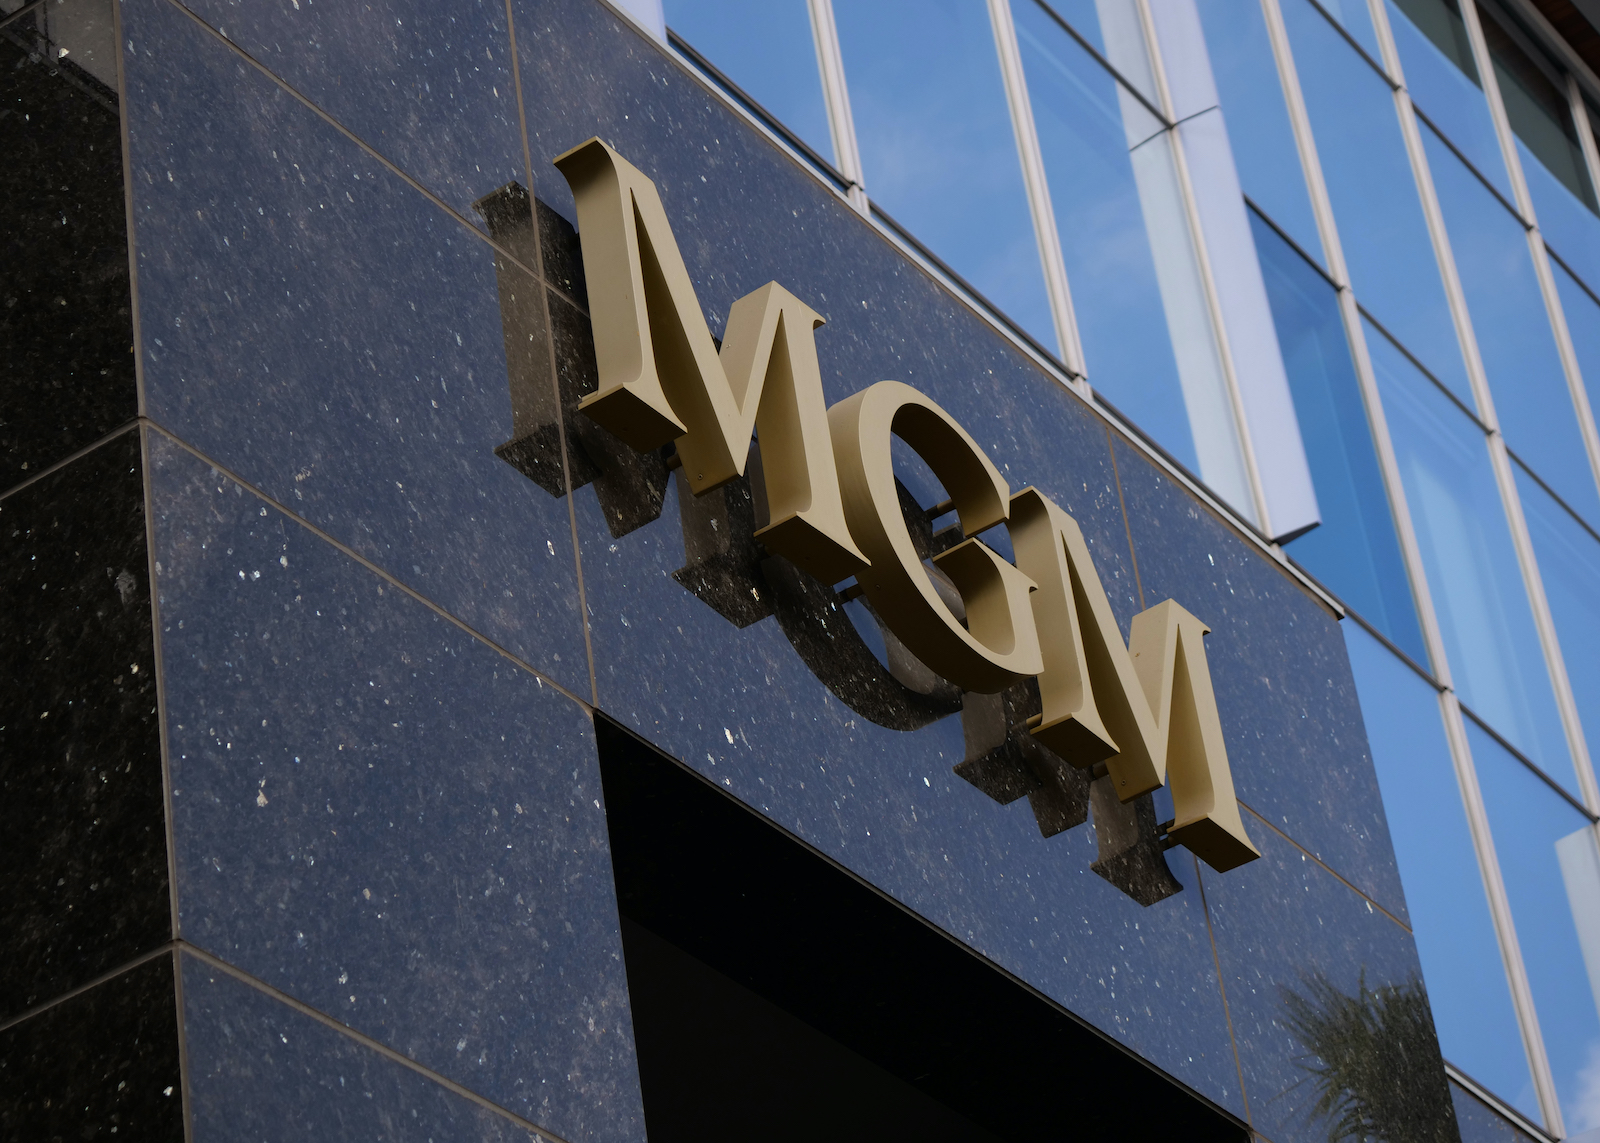 BEVERLY HILLS, CALIFORNIA - MAY 26: The MGM logo of Metro-Goldwyn-Mayer Studios is displayed on the office building on May 26, 2021 in Beverly Hills, California. Amazon has made a $8.45 billion deal to purchase the Hollywood media company MGM. (Photo by Kaelin Mendez/Getty Images)